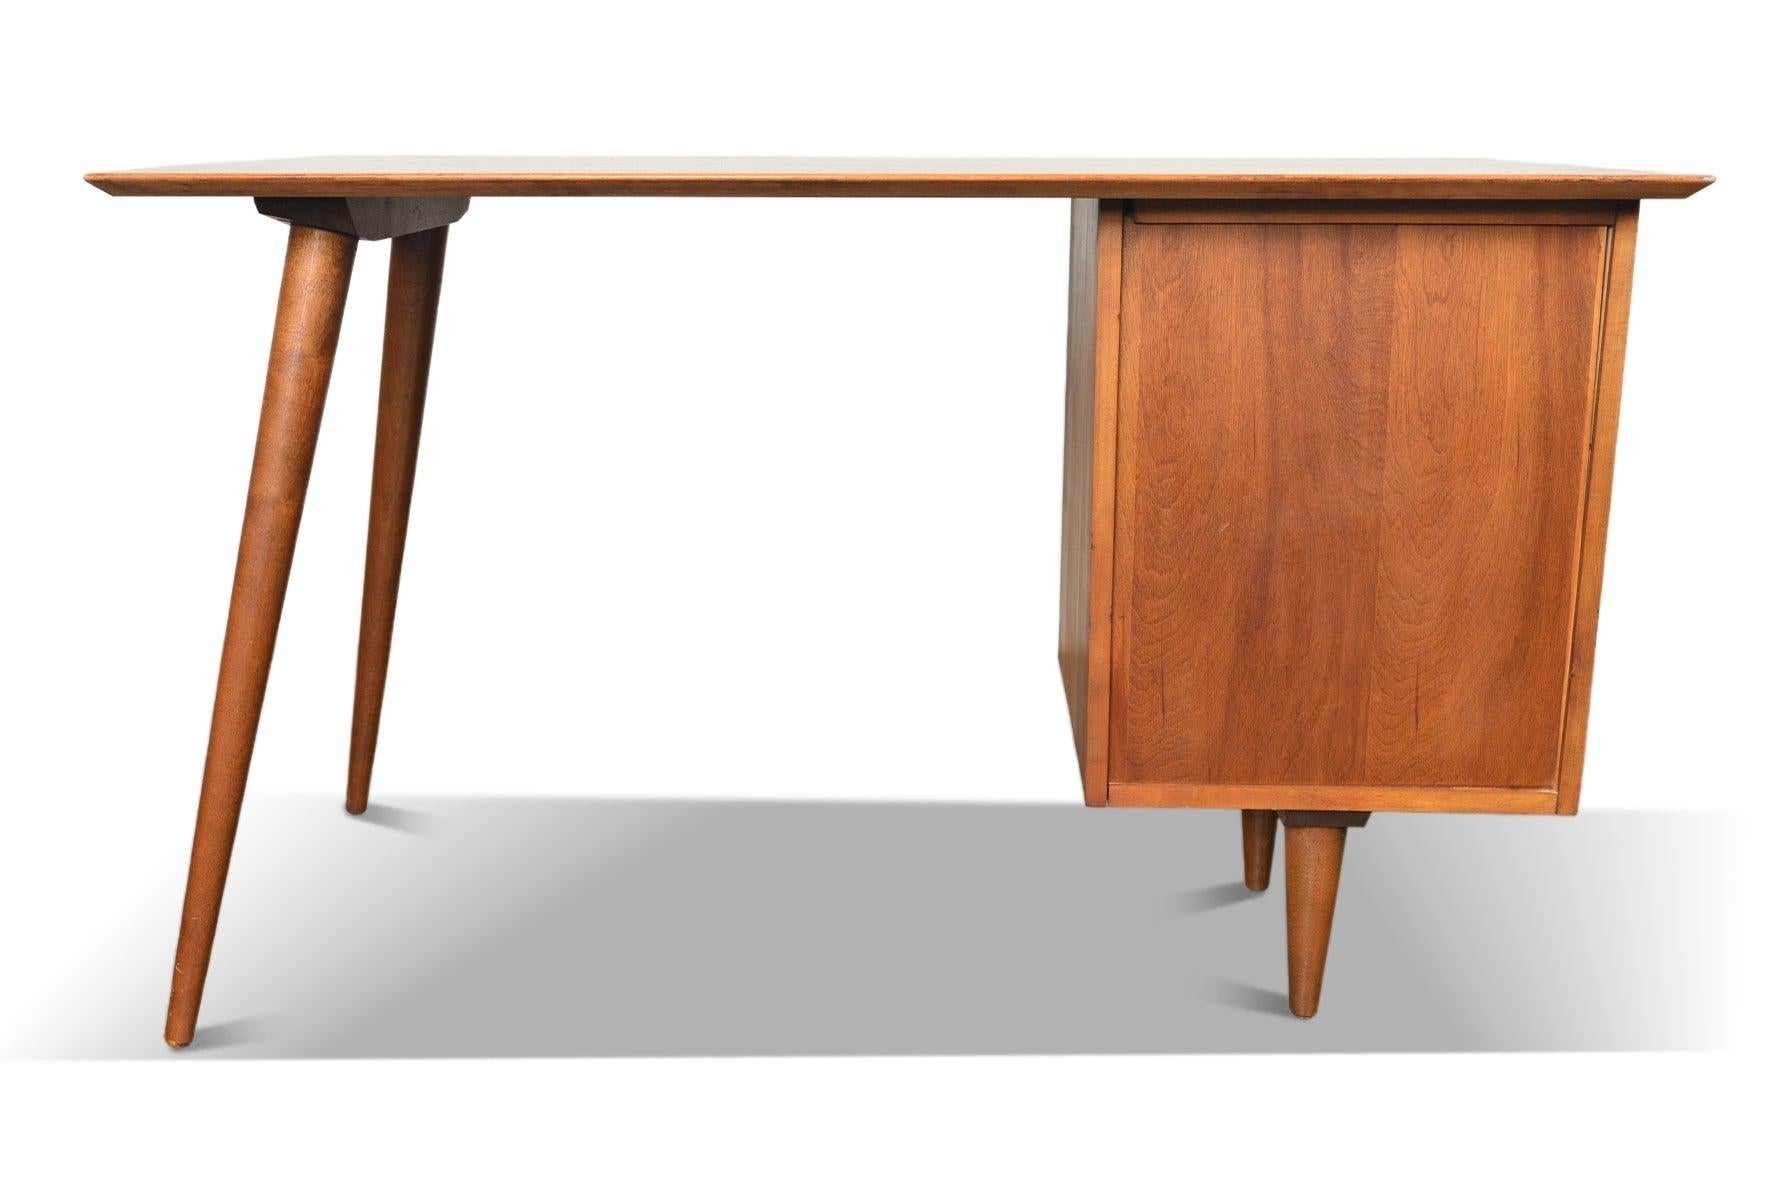 Paul Mccobb Model 1560 Writing Desk In Maple In Excellent Condition For Sale In Berkeley, CA